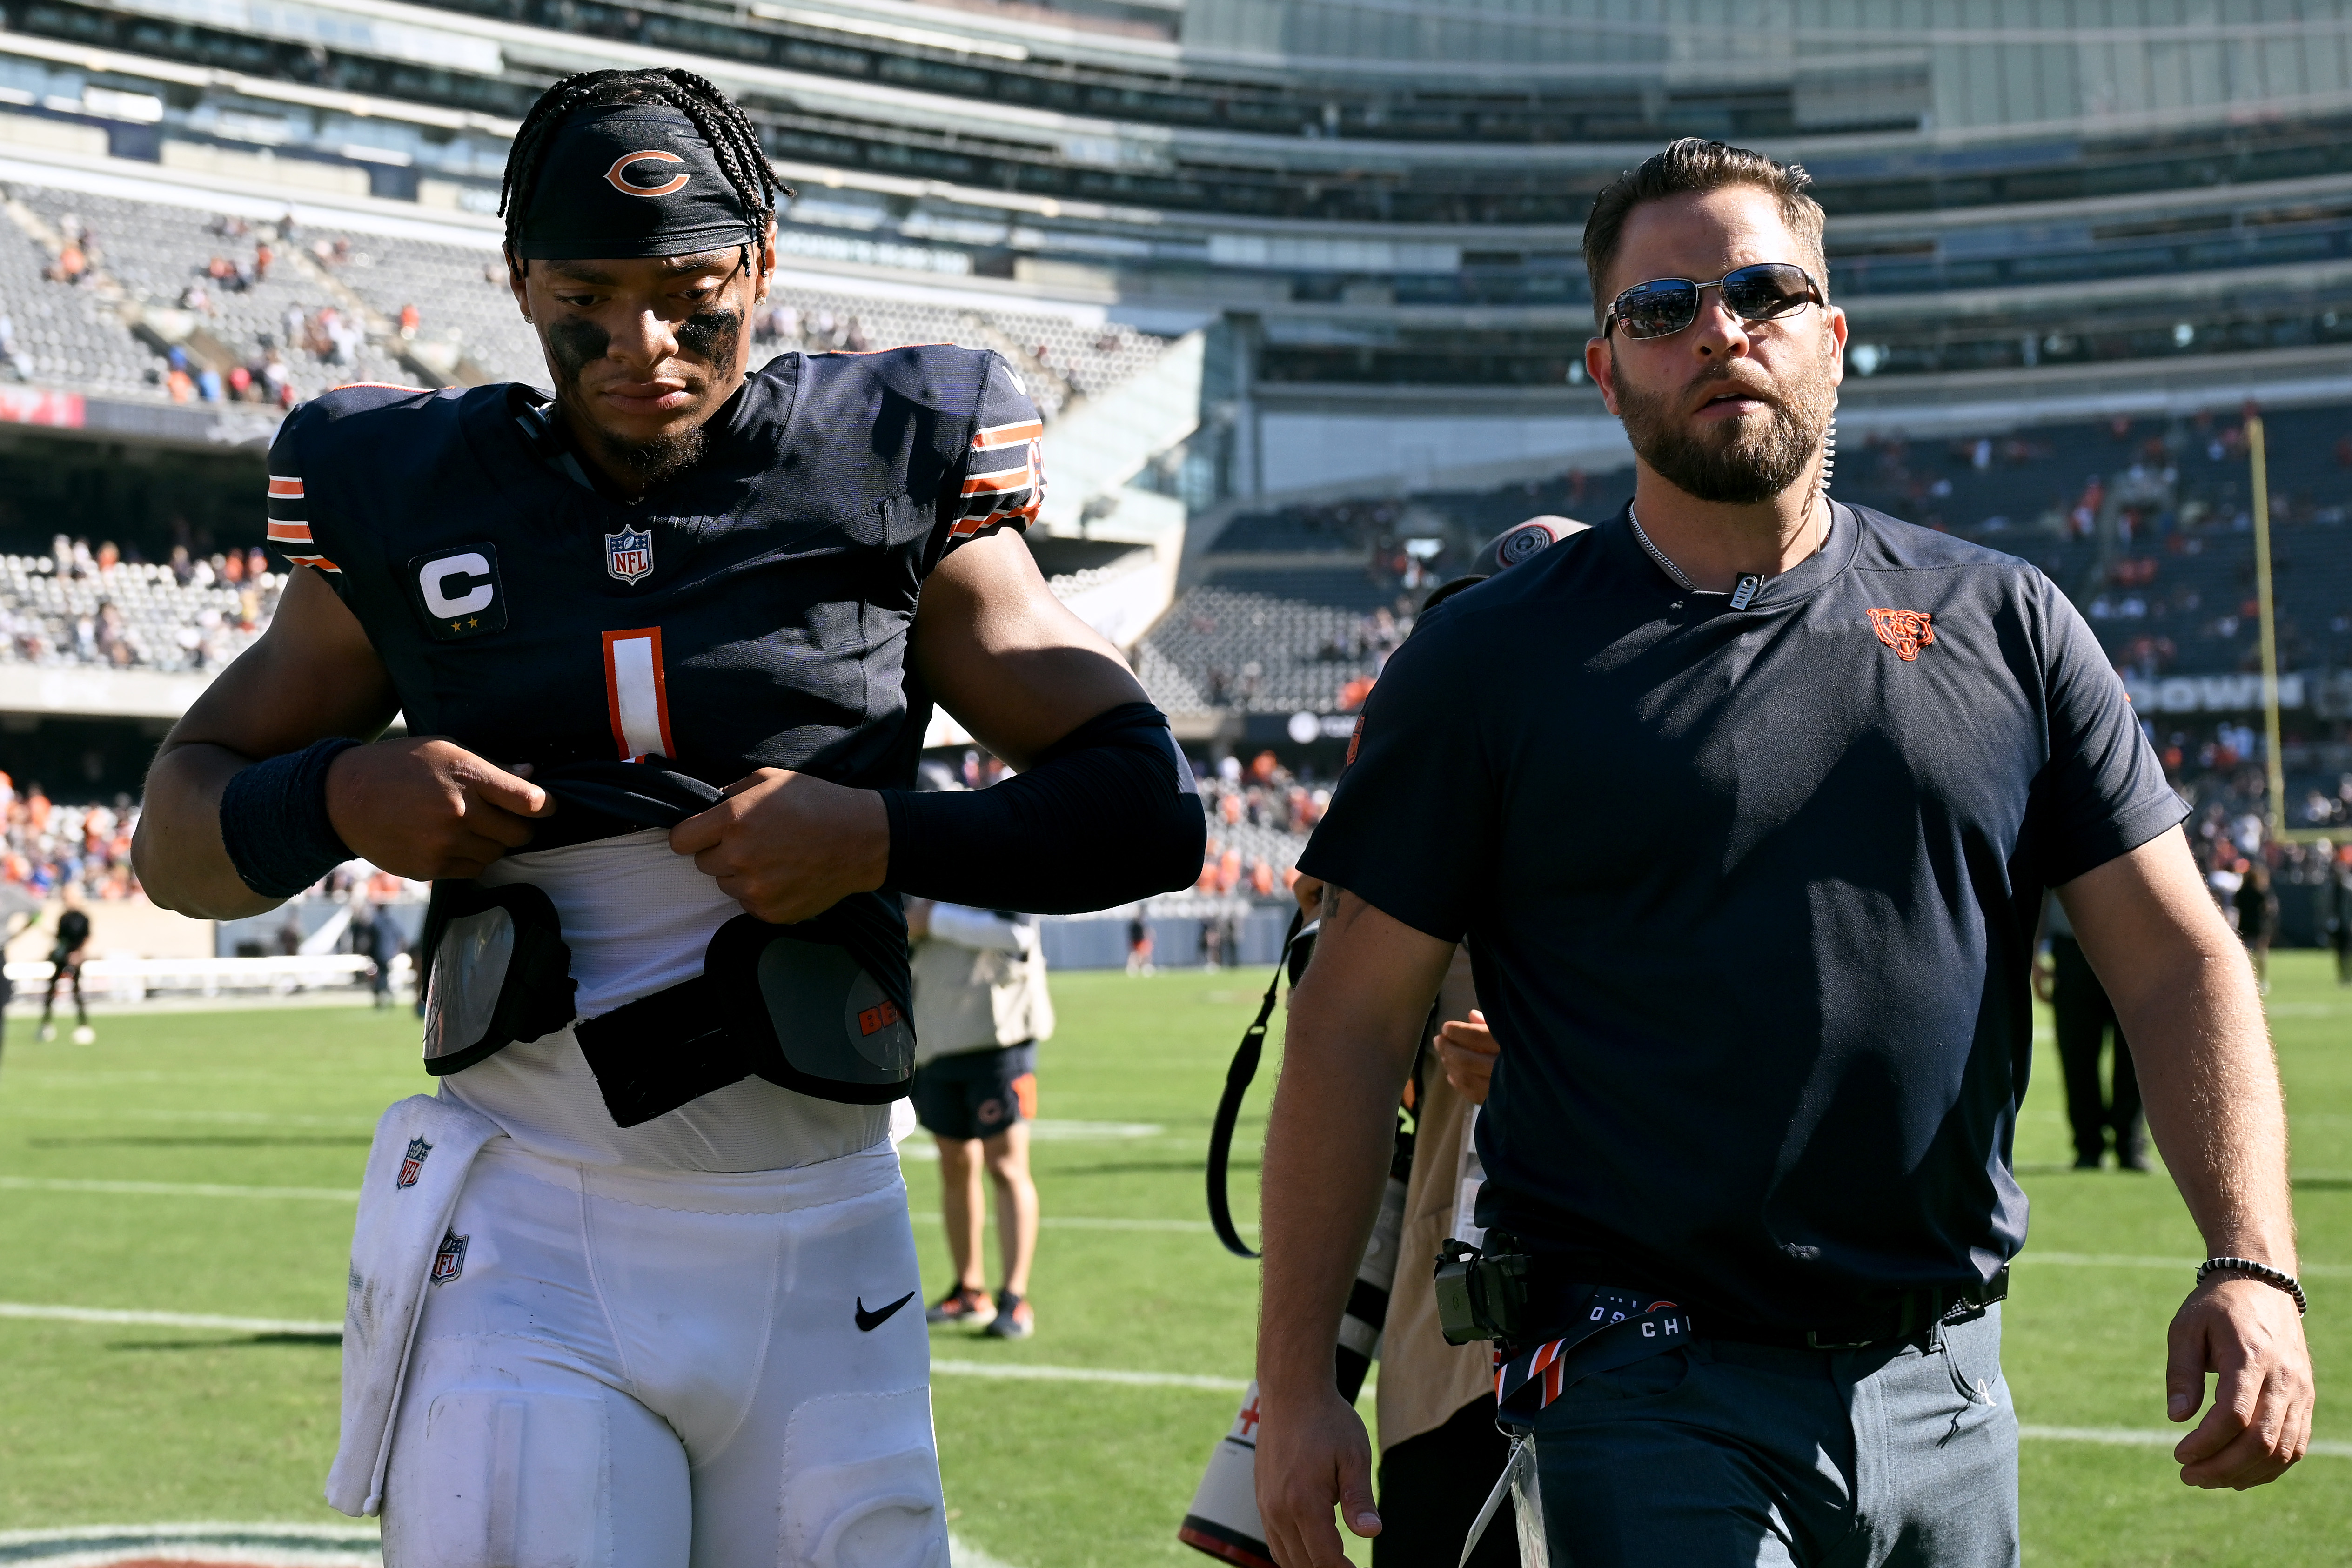 After Bears blow 21-point lead, it's fair to question if they're ready to win